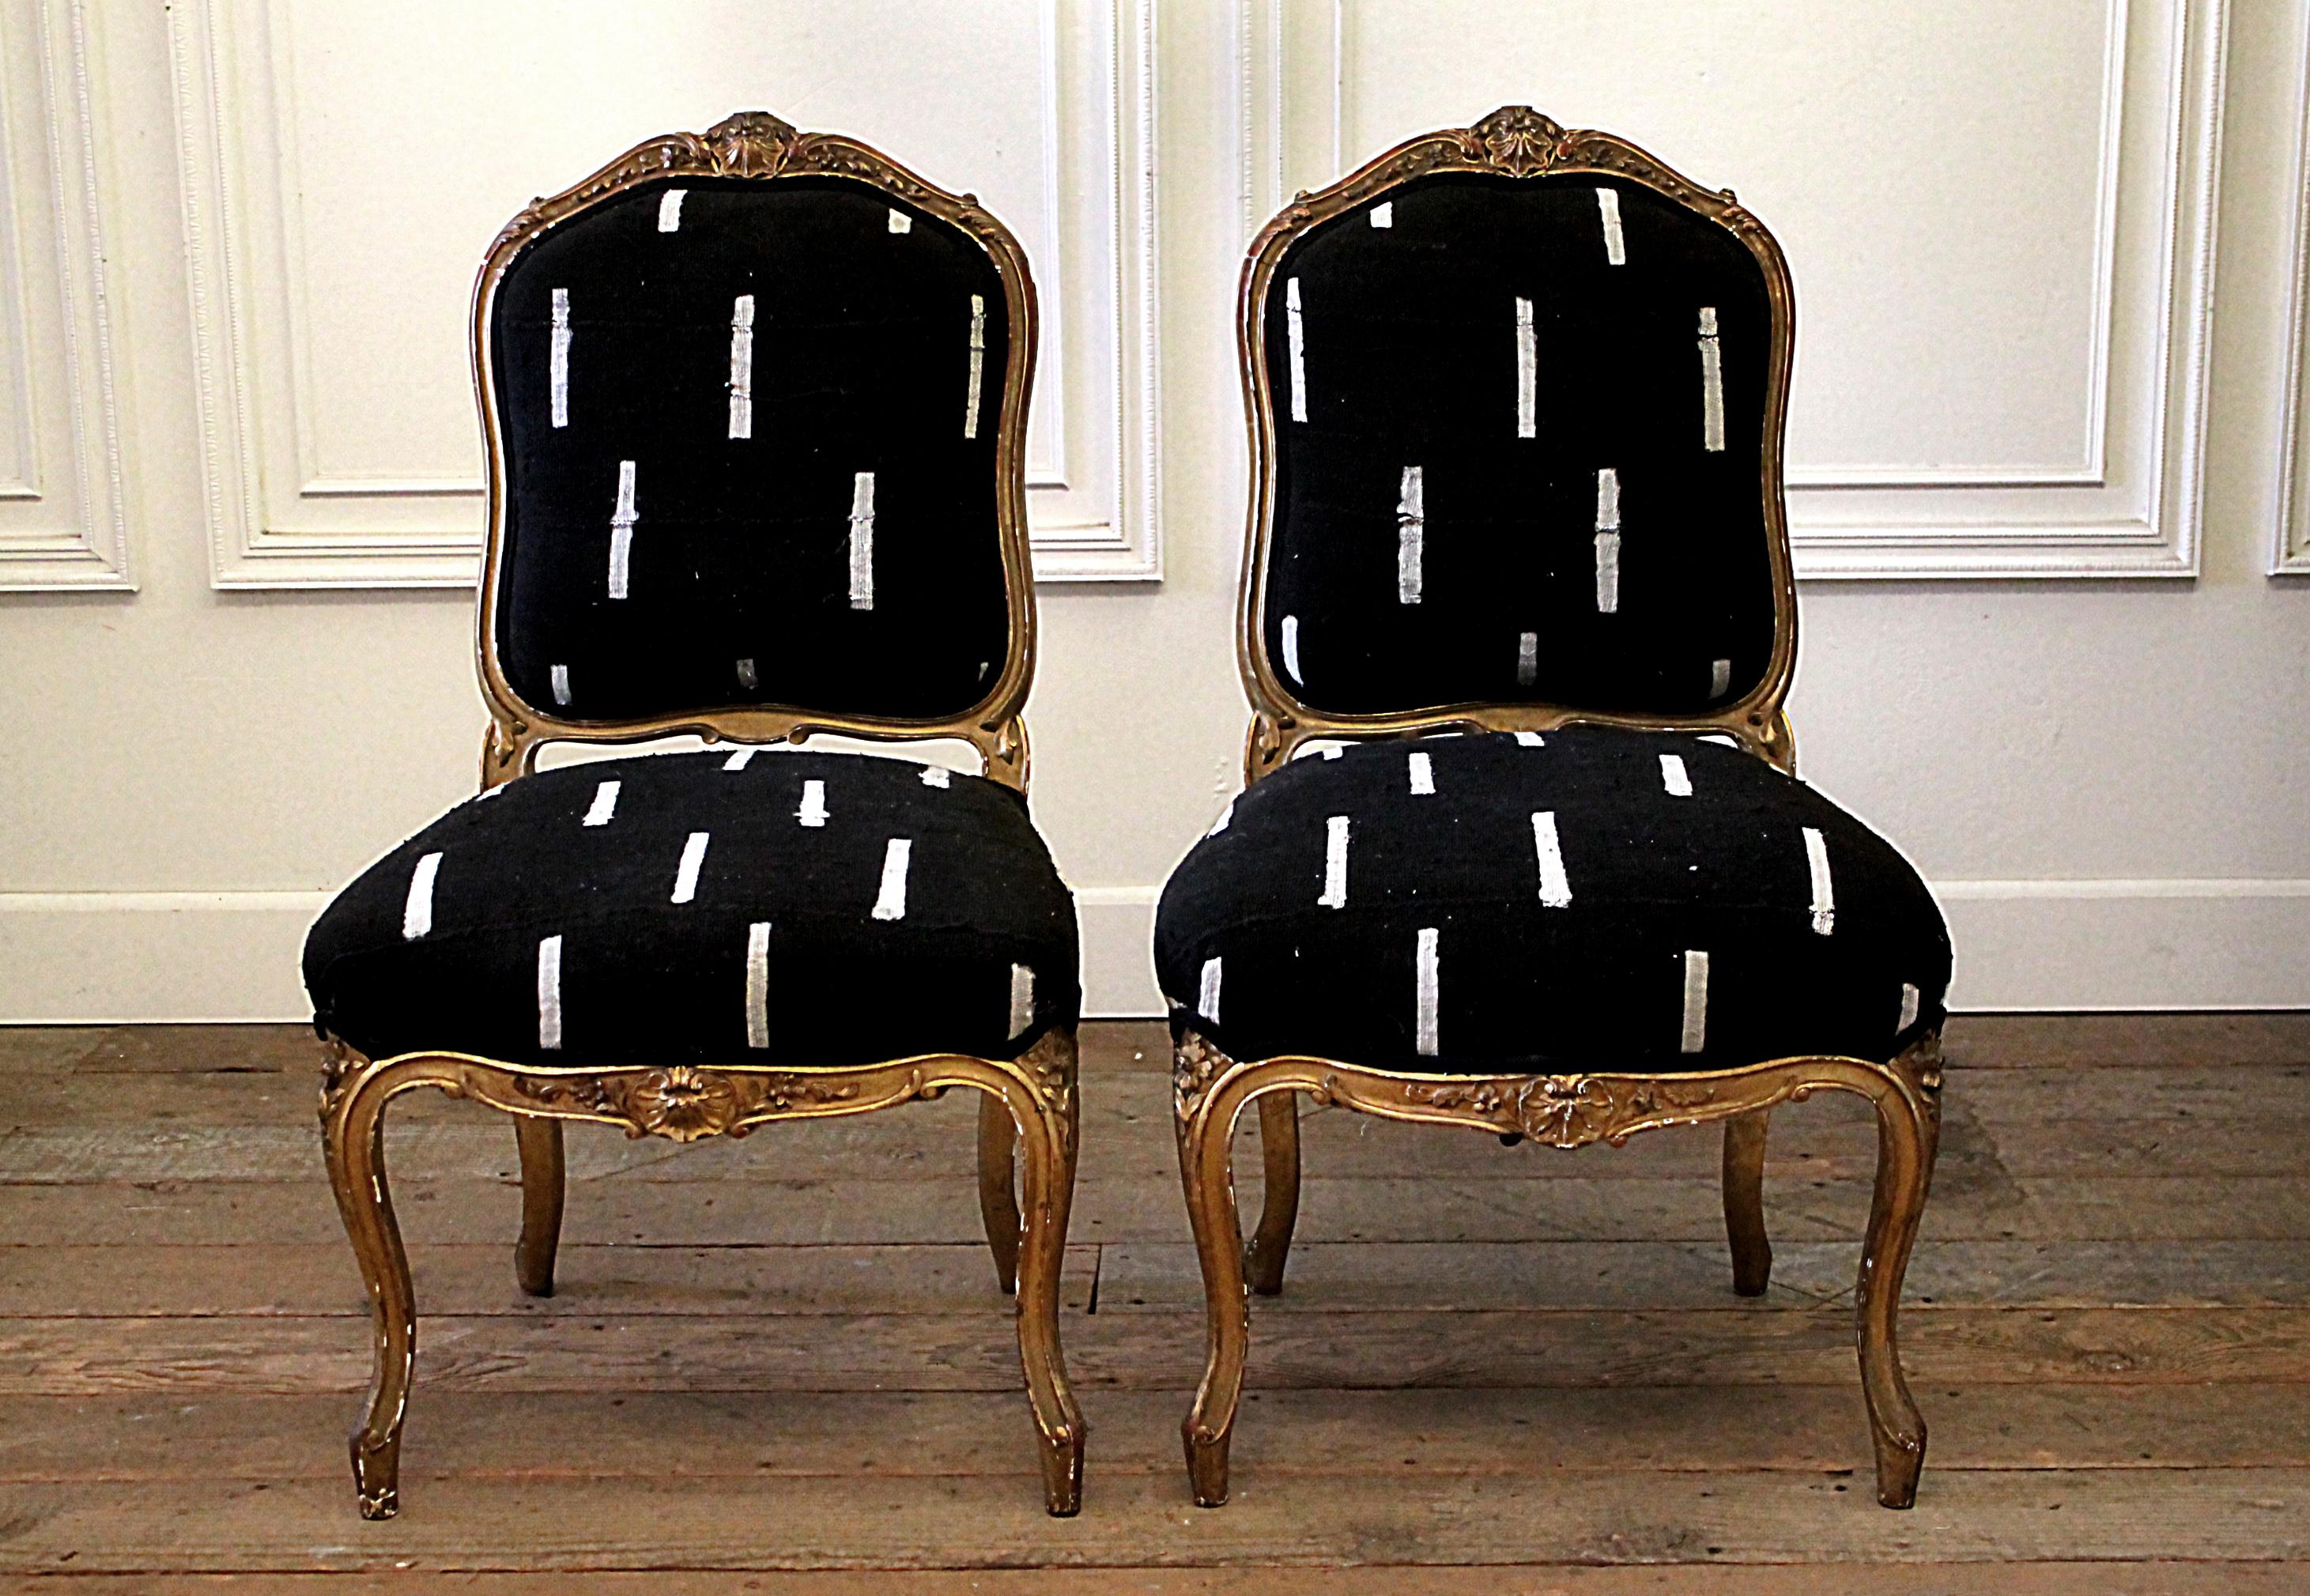 Late 19th century giltwood Louis XV style French chairs in vintage upholstery
Beautiful side chairs upholstered in a black and white vintage mud cloth fabric.
Original giltwood finish, with aged patina. These chairs are sturdy ready for daily